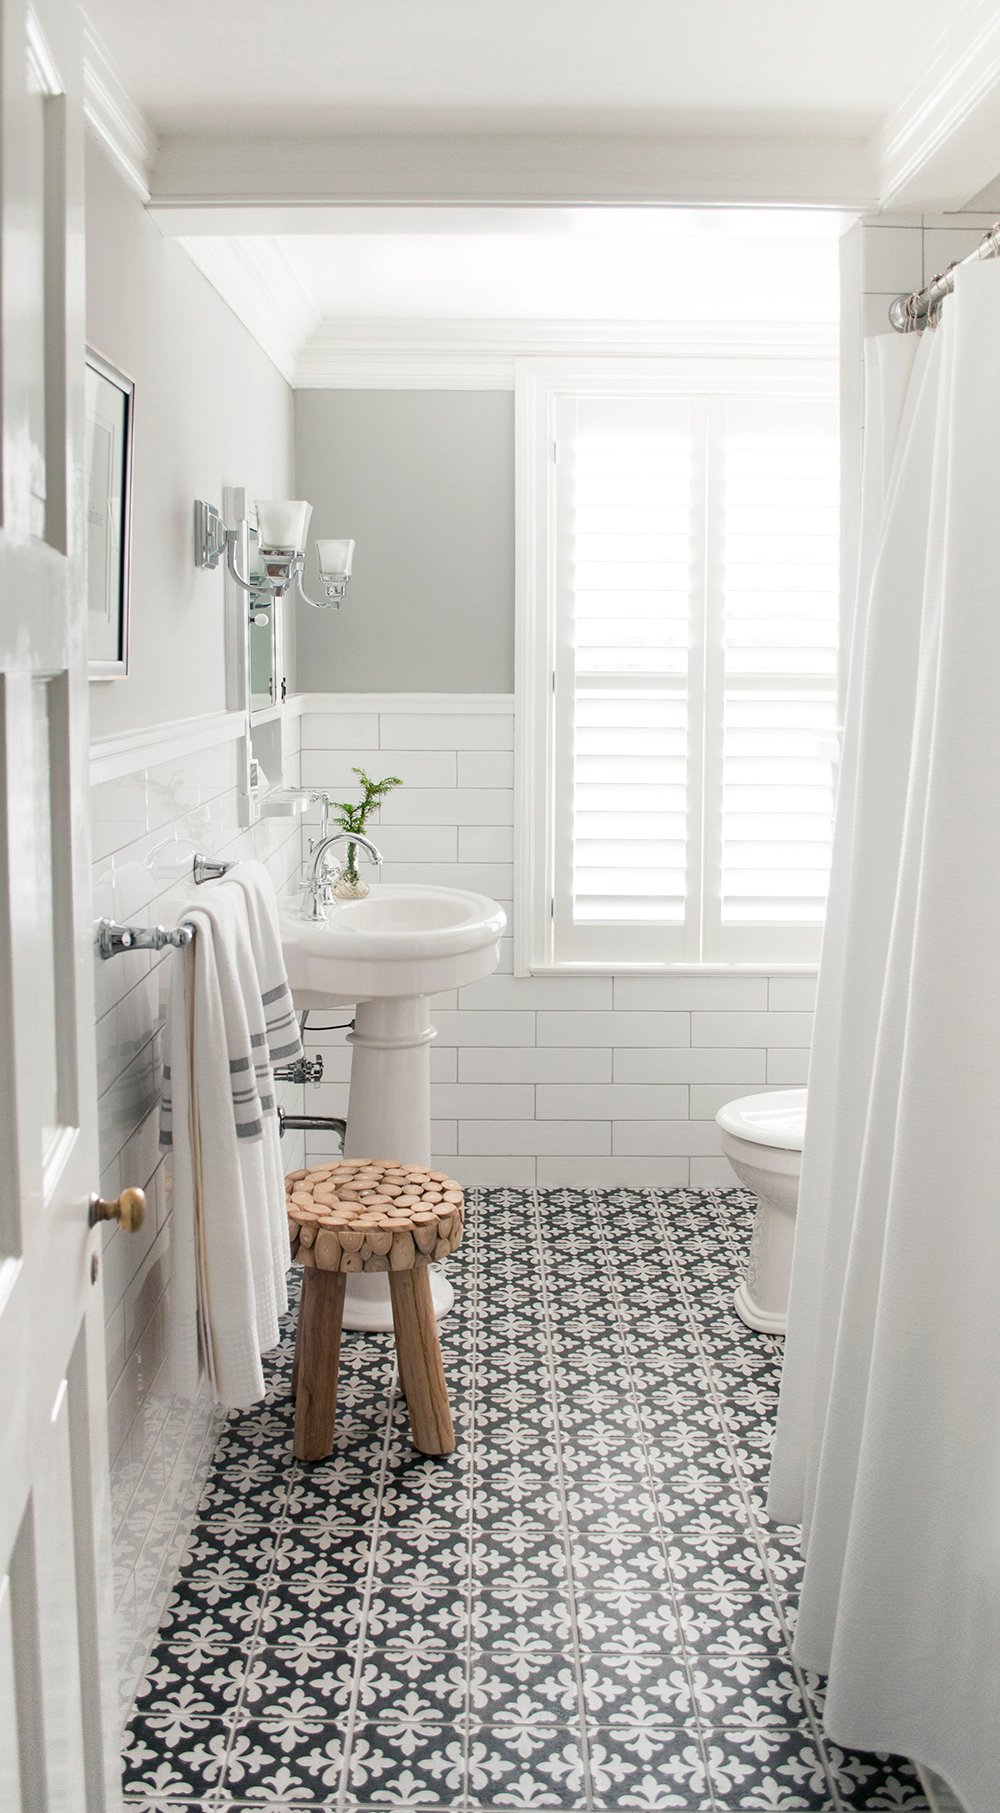 Roundup : Affordable Patterned Floor Tile - roomfortuesday.com